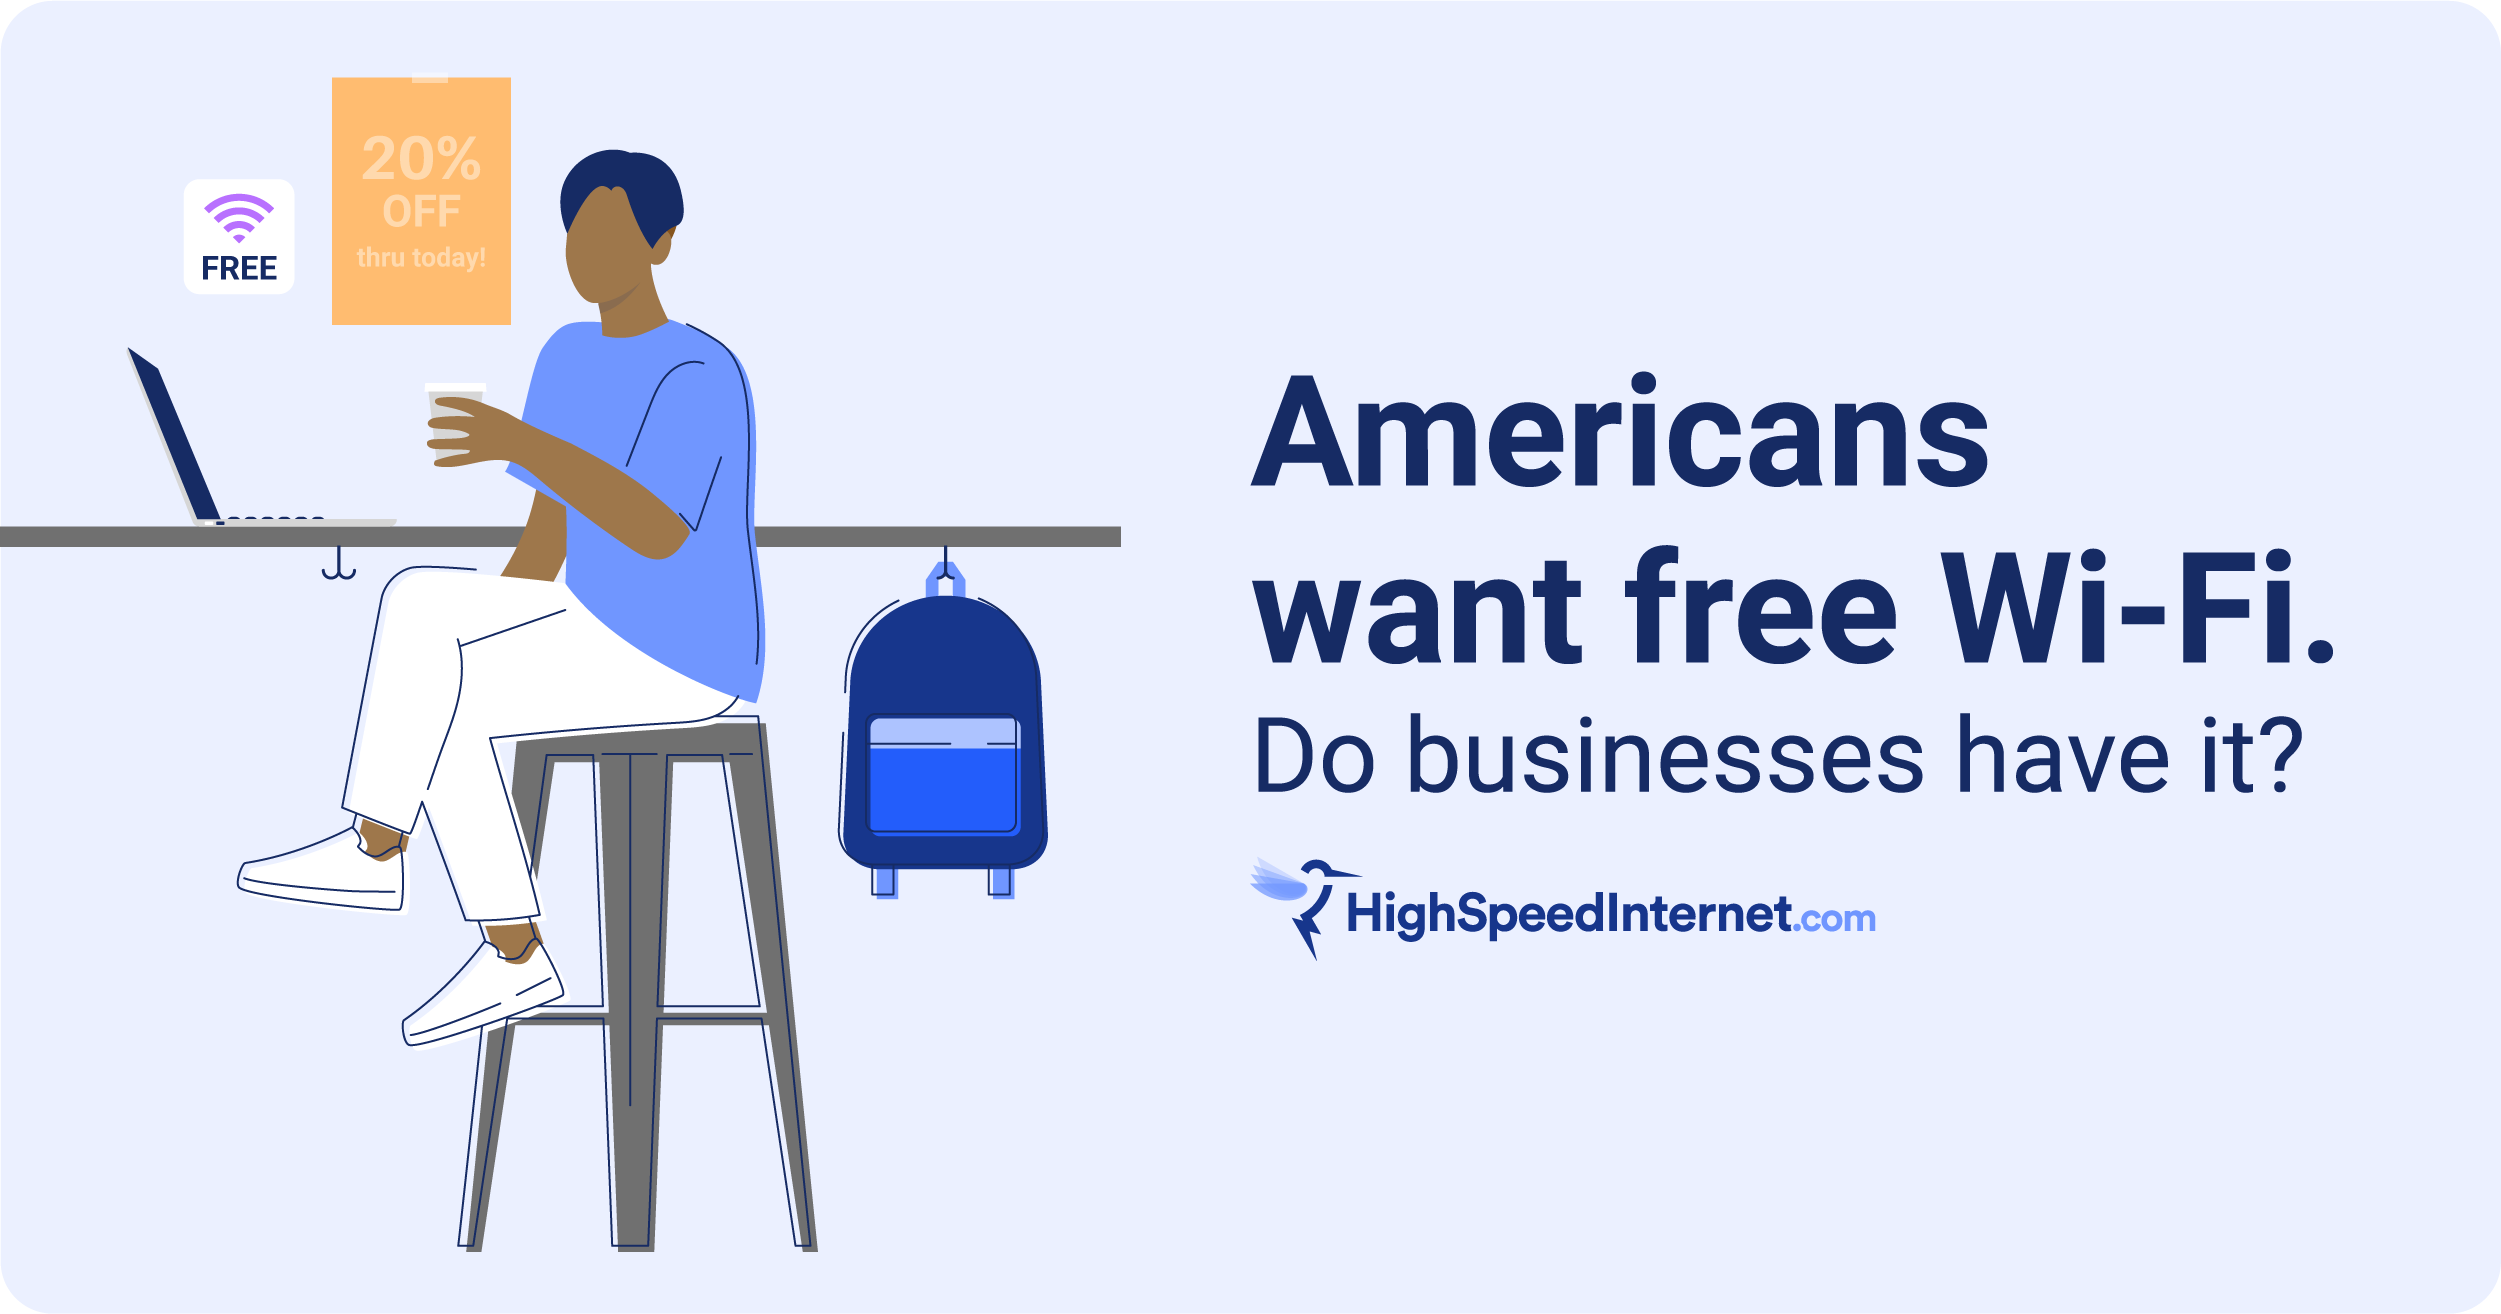 Americans want free wi-fi, but do businesses have it?